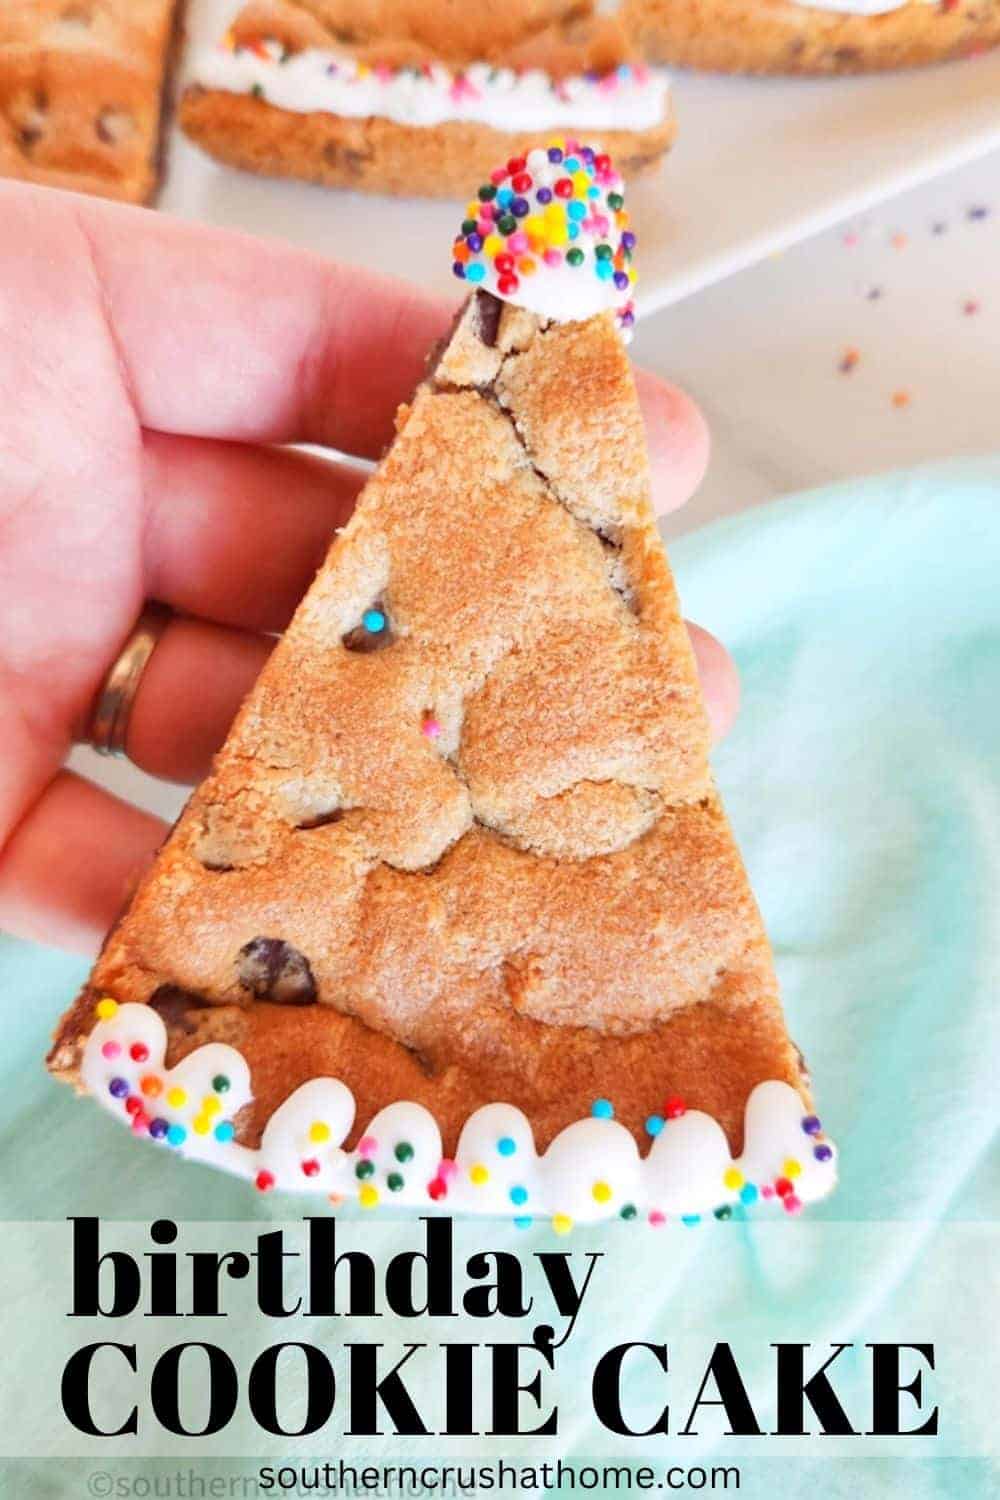 https://www.southerncrushathome.com/wp-content/uploads/2023/03/Birthday-Cookie-Cake-PIN-1.jpg